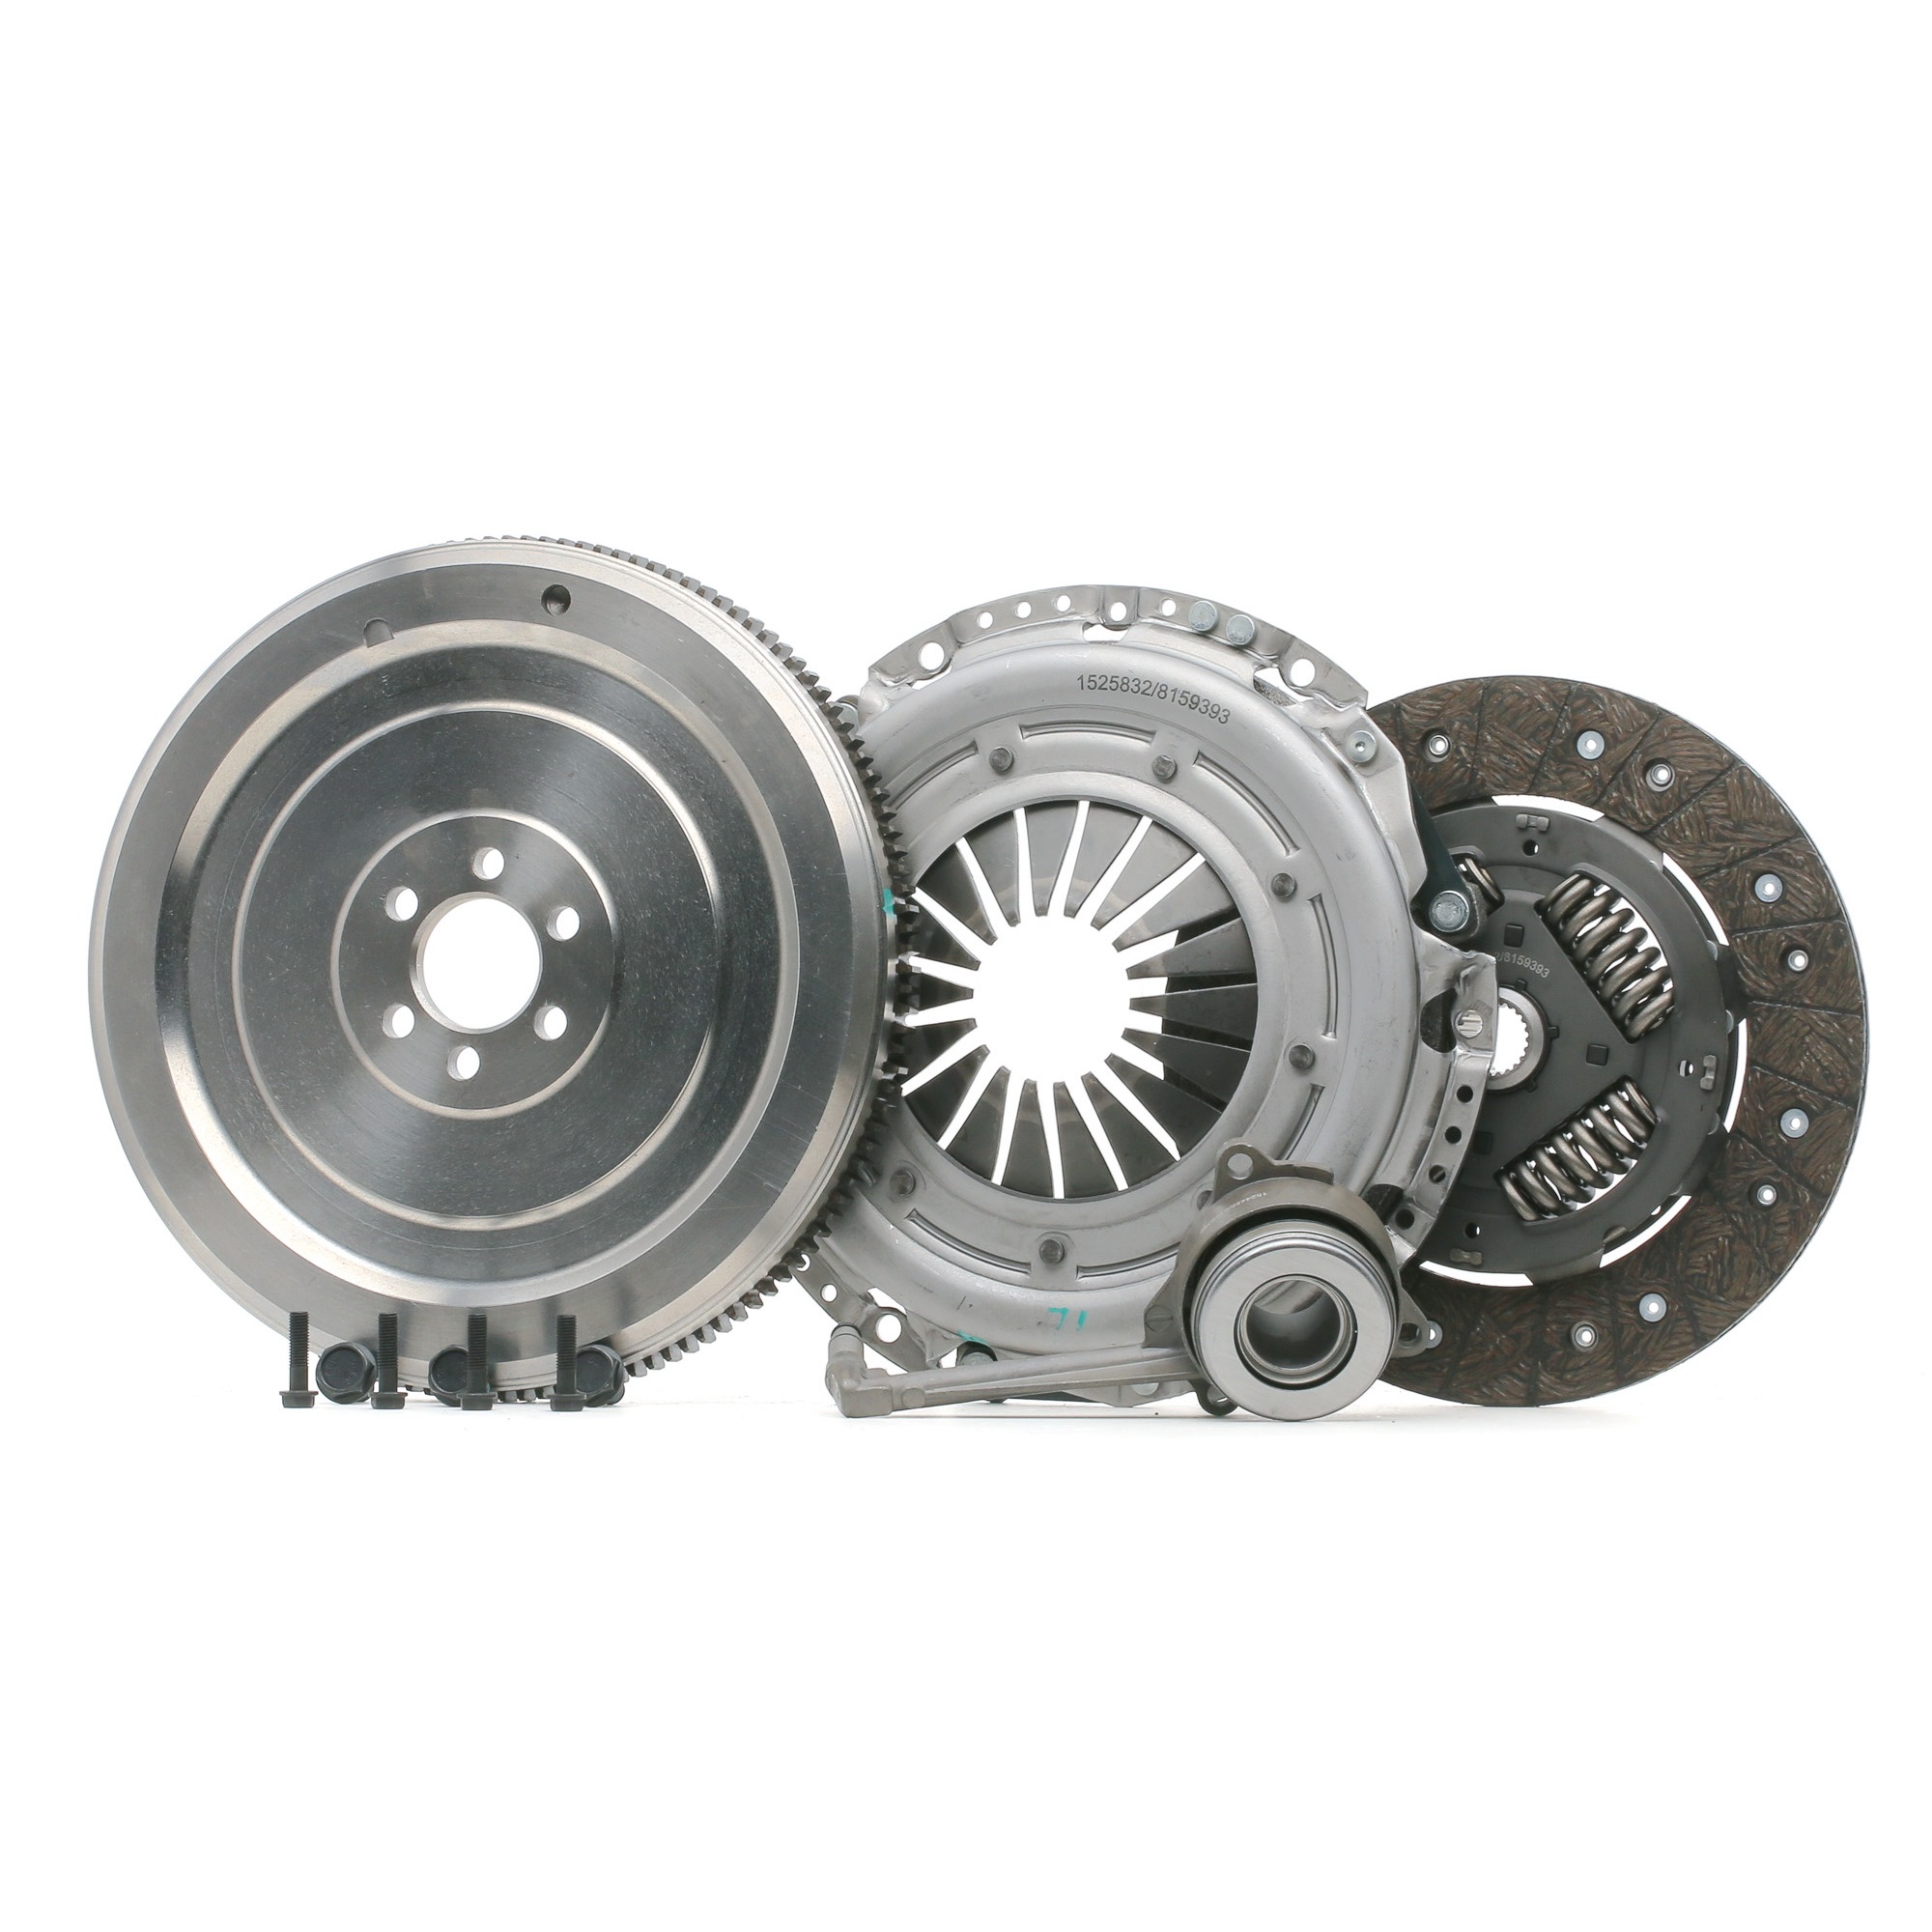 RIDEX 479C0345 Clutch kit four-piece, with clutch pressure plate, with central slave cylinder, with flywheel, with clutch disc, 240mm